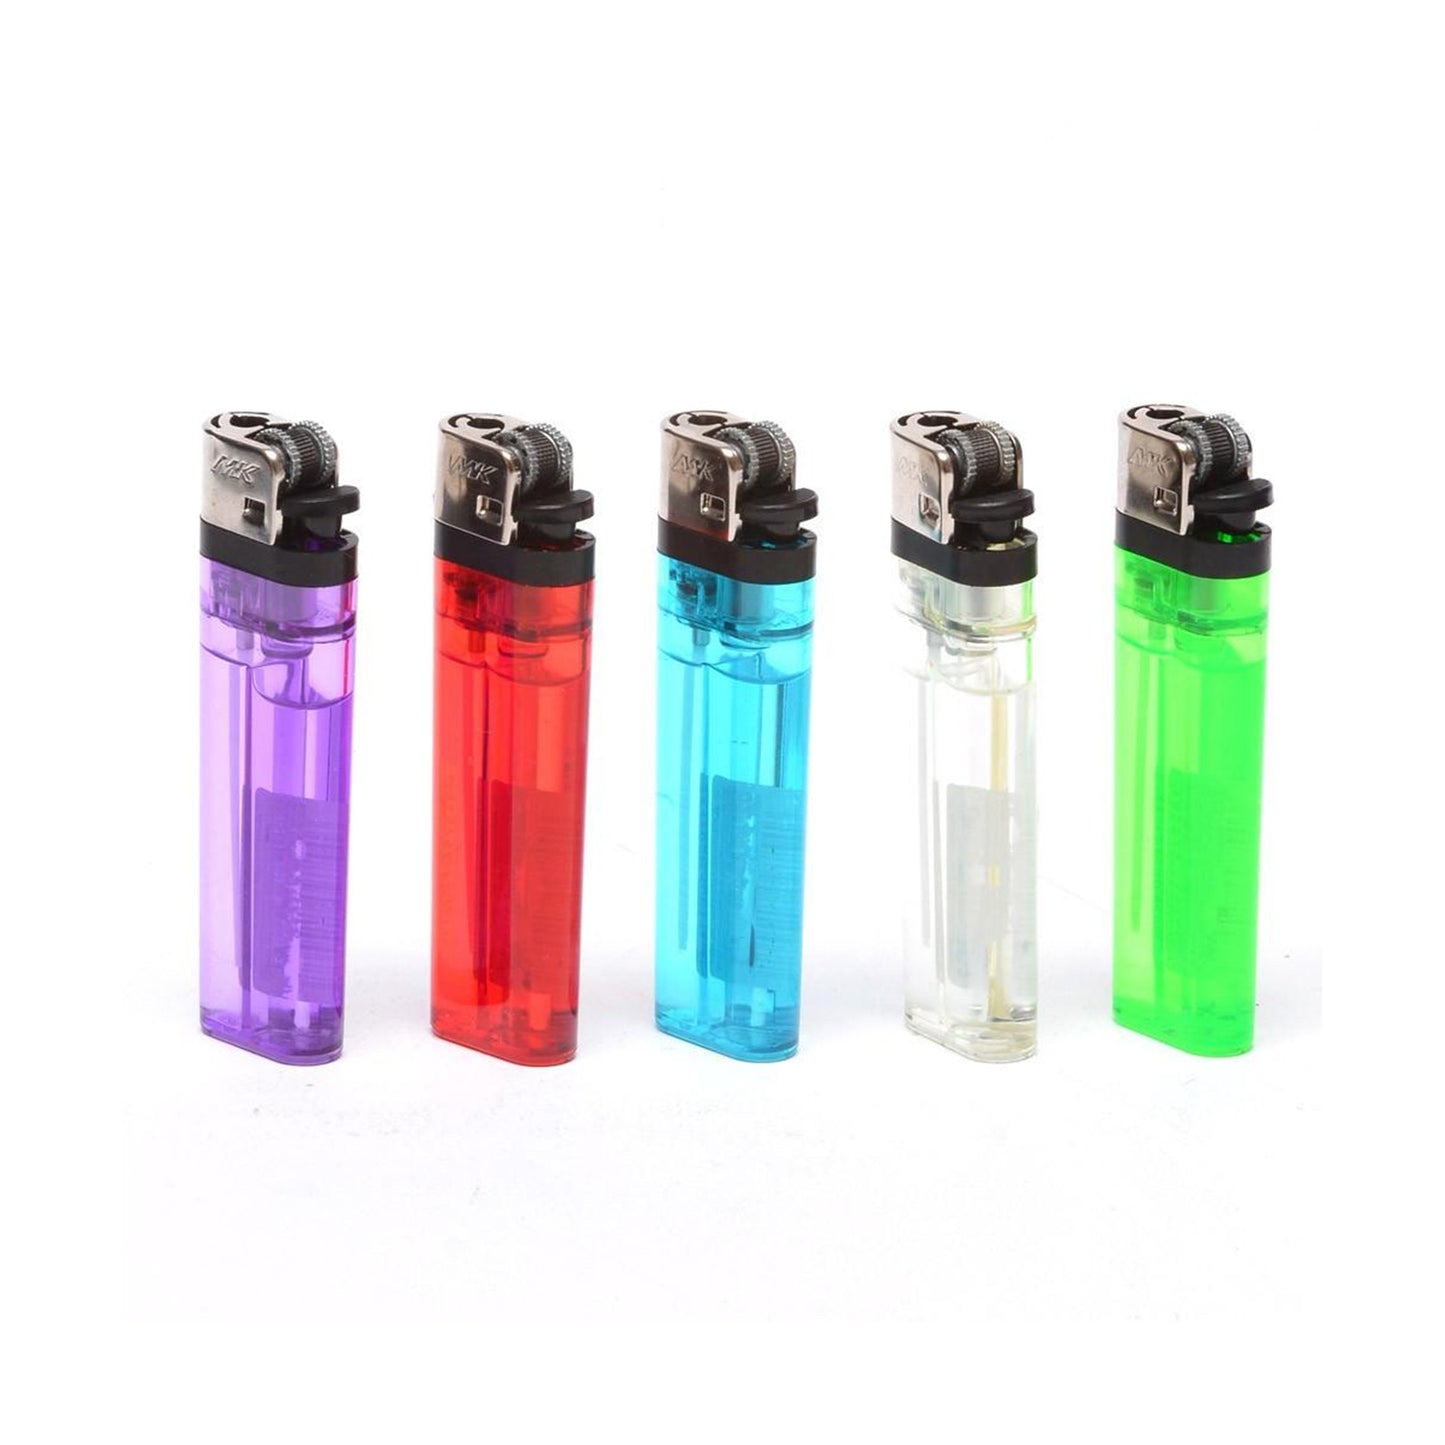 Maxlight Disposable Lighter - 50 Pack with Display Stand